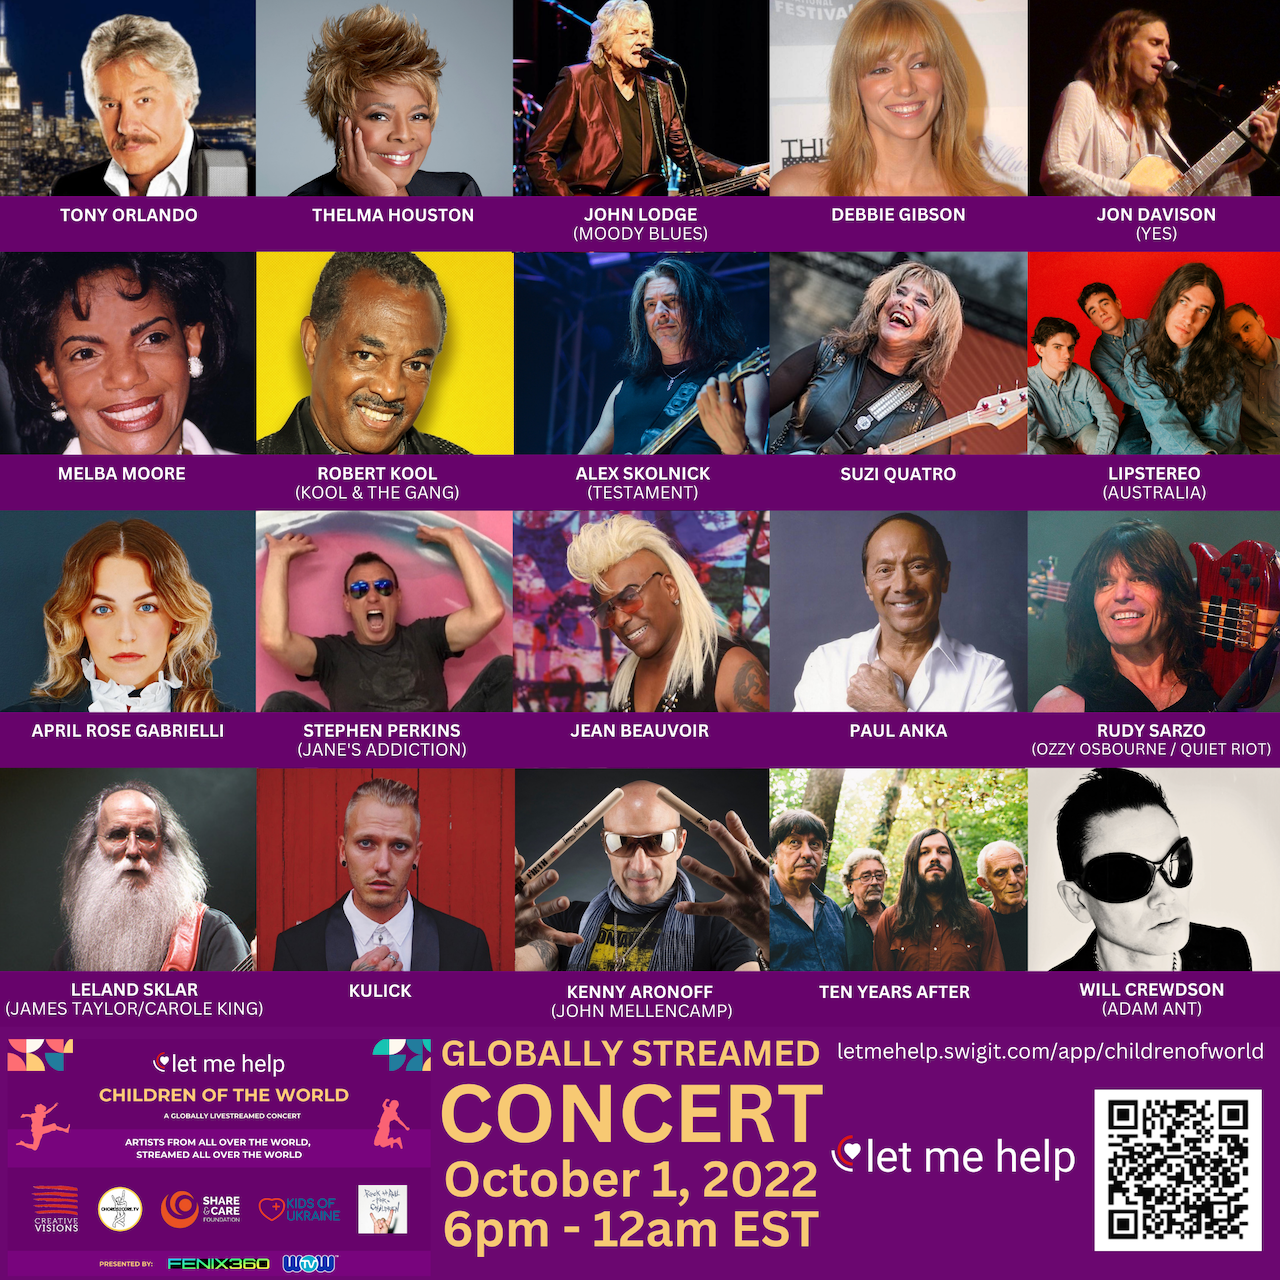 More Than 80 Superstars Join Let Me Help, Inc "Children of the World" Benefit Concert on October 1, 2022 in a Global Stream